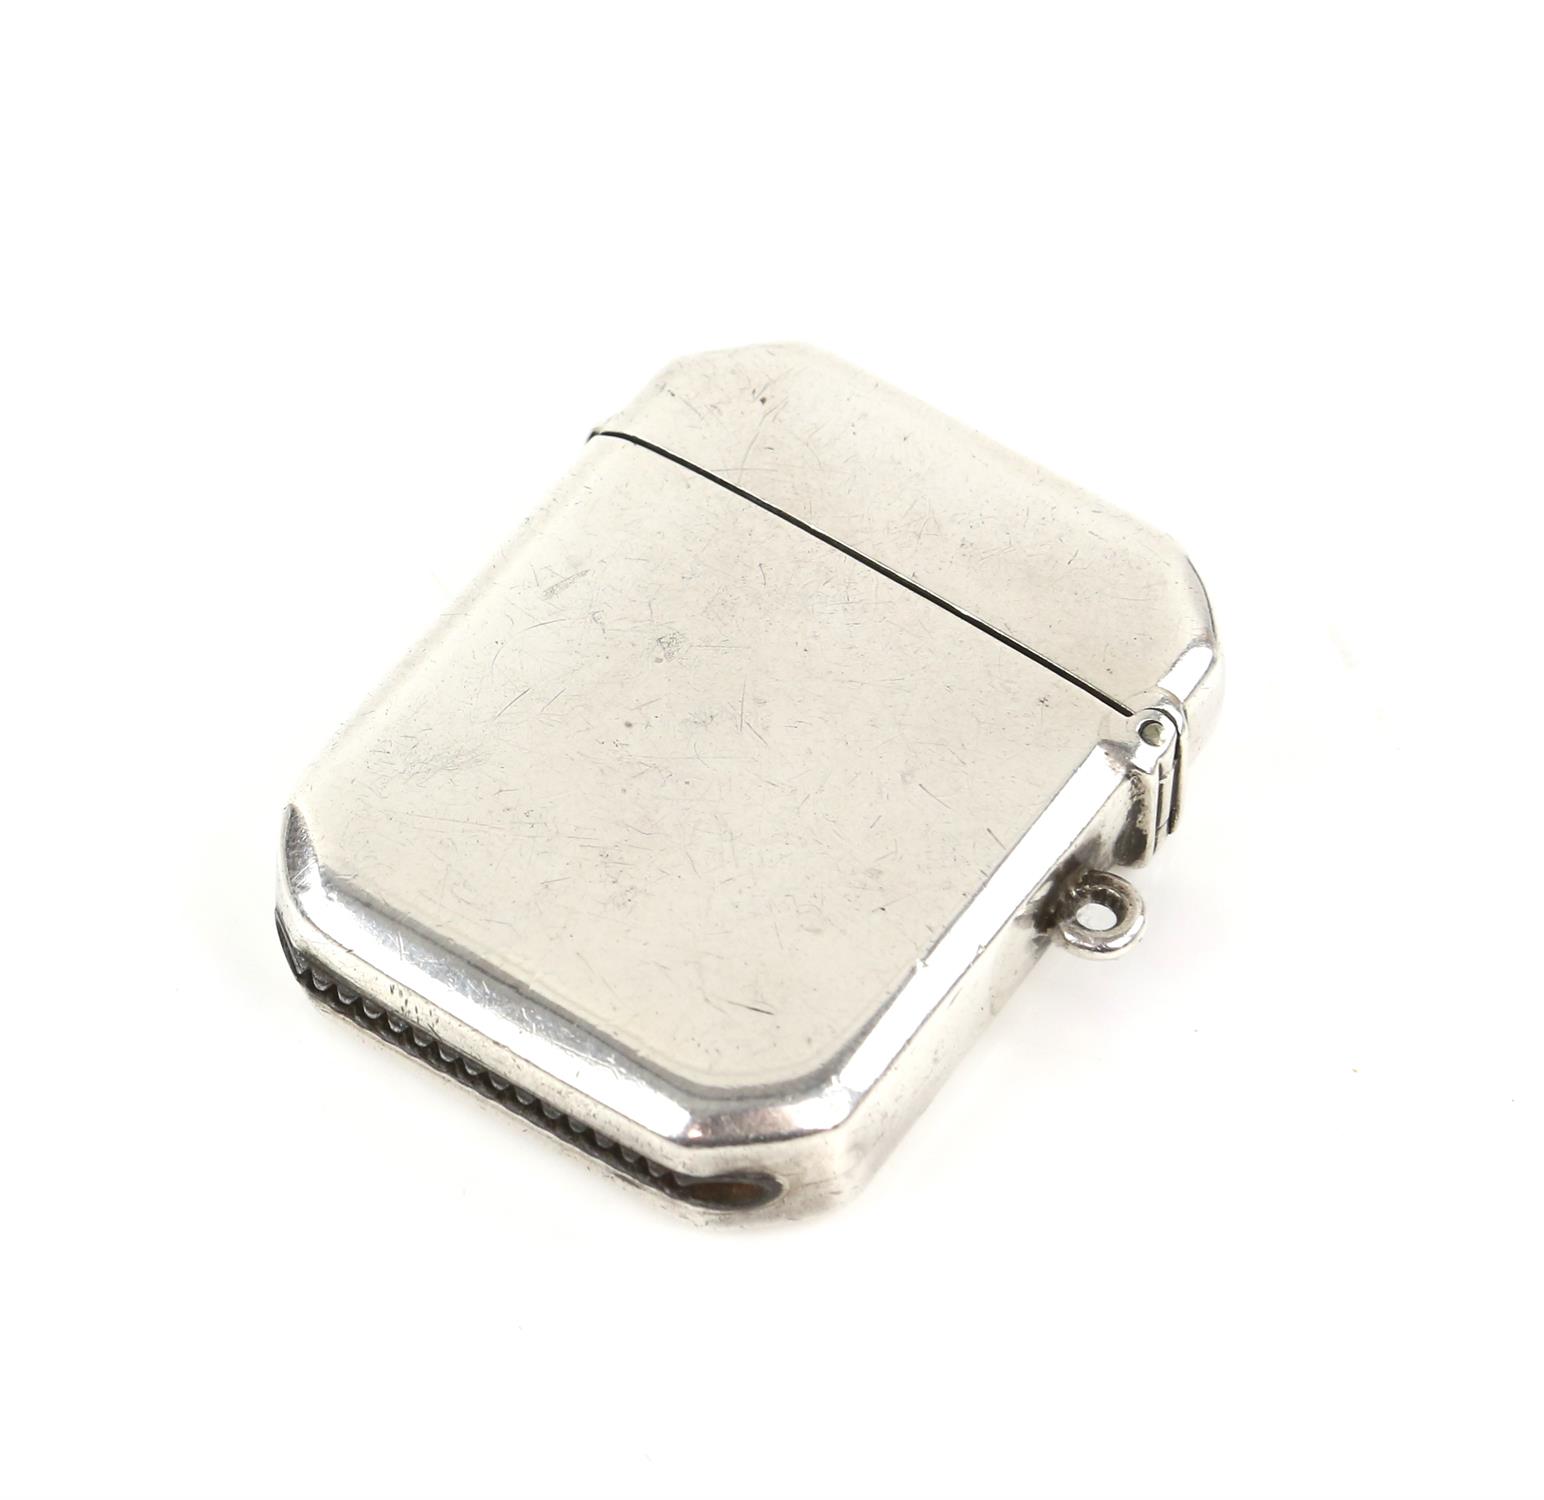 Silver octagonal form vesta case with bright cut image of a Kangaroo by Stewart Dawson and Co Ltd, - Image 2 of 3